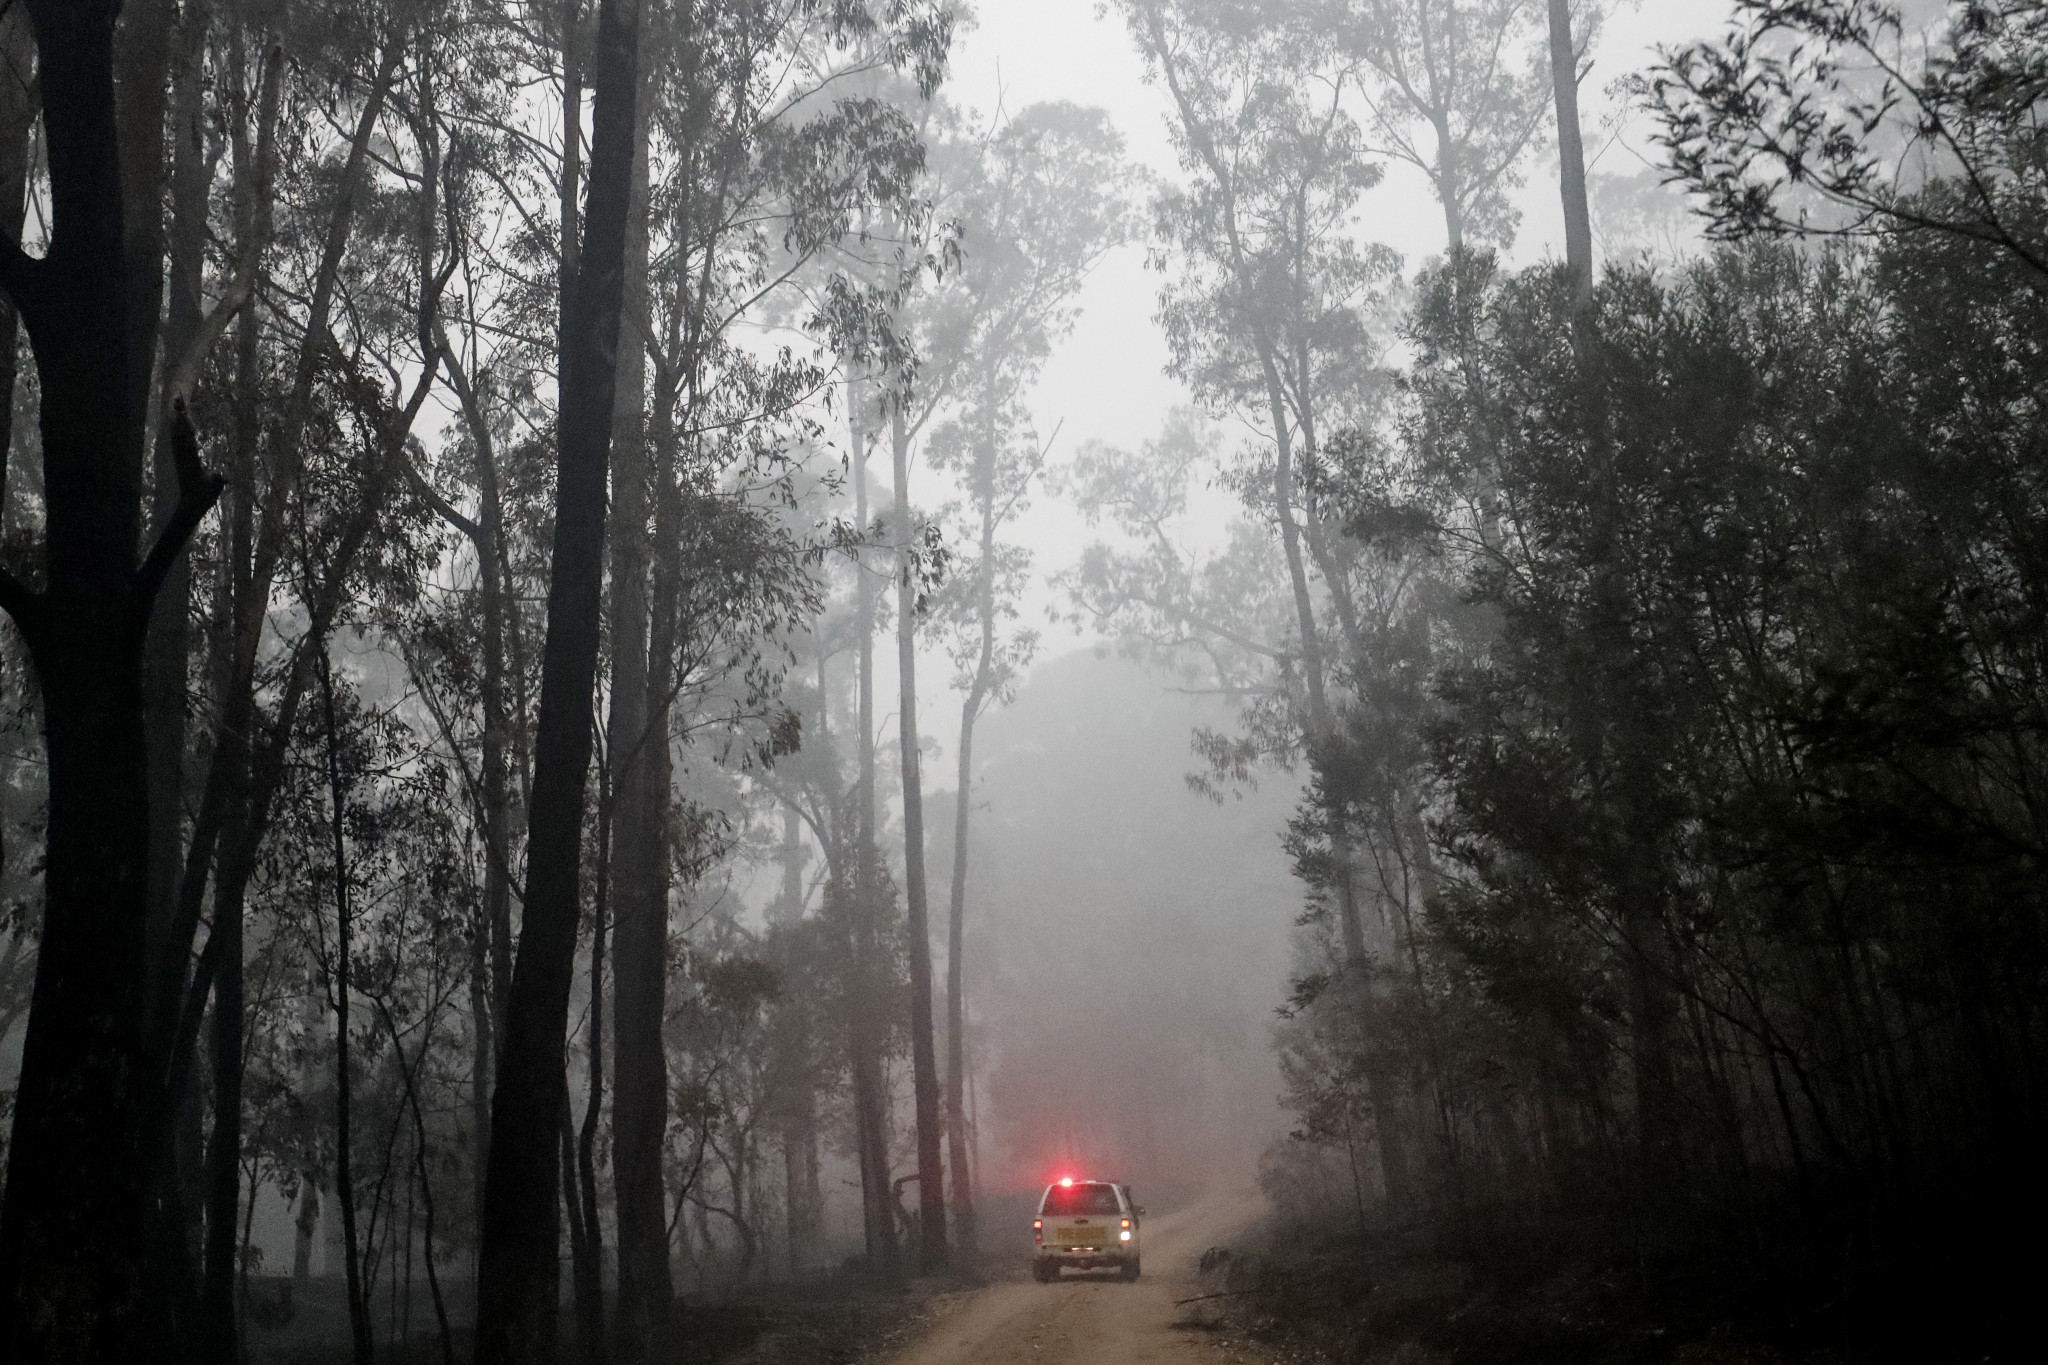 Bushfires have heavily impacted south-eastern Australia ©Getty Images